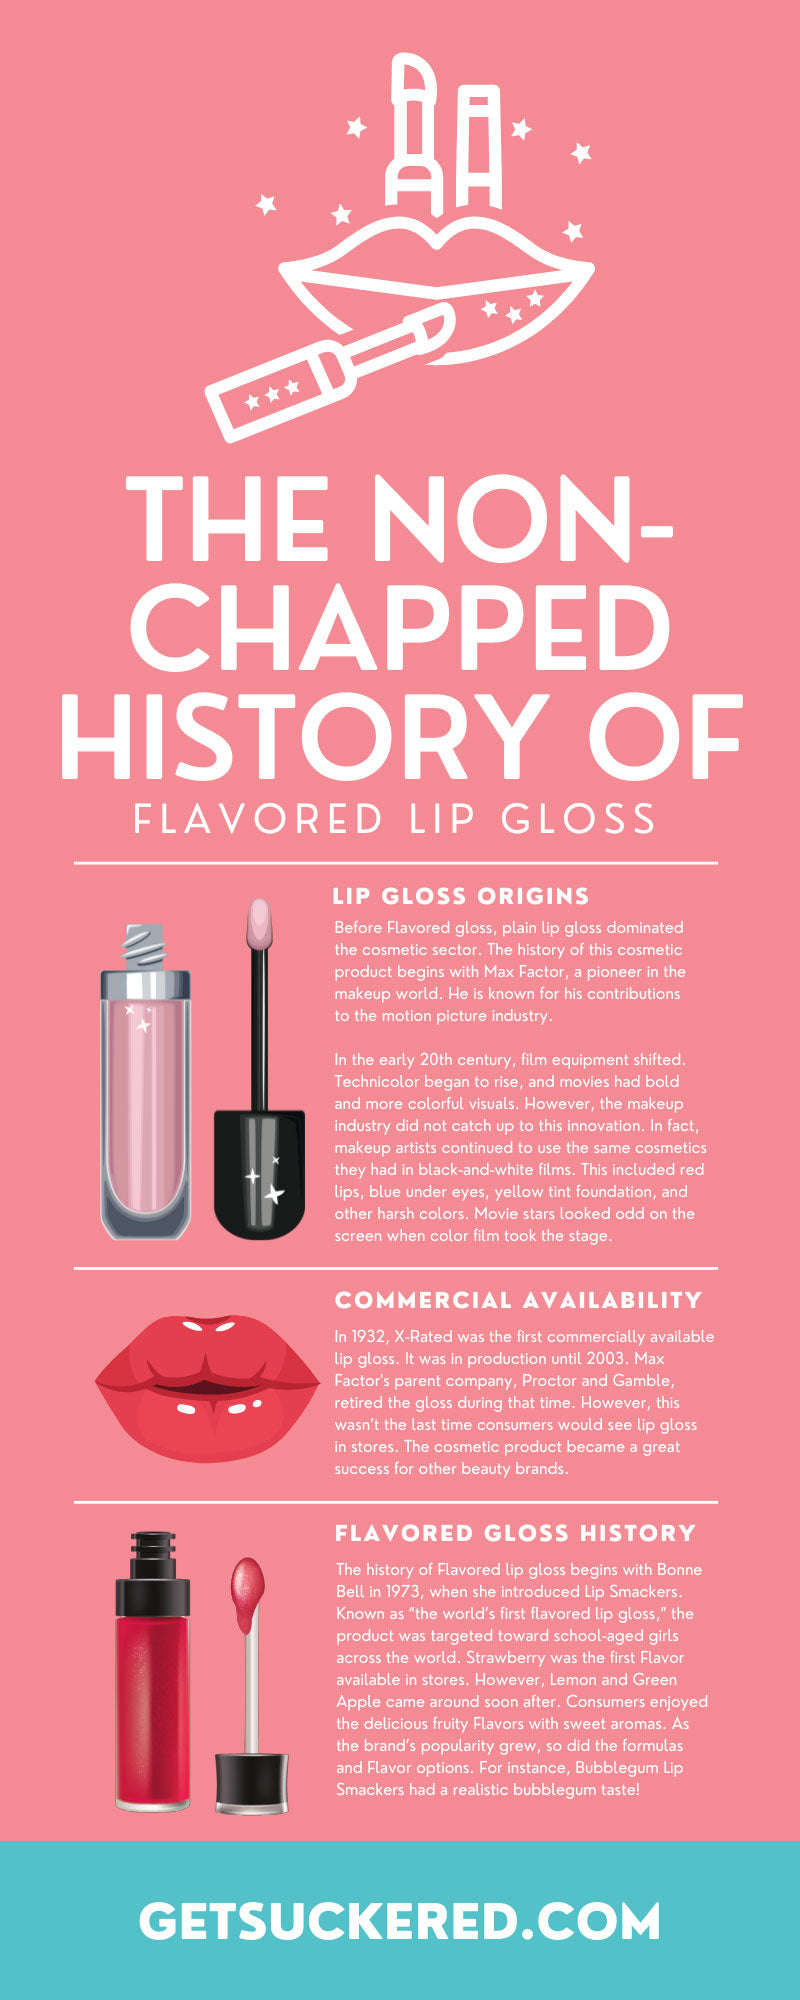 The Non-Chapped History of Flavored Lip Gloss